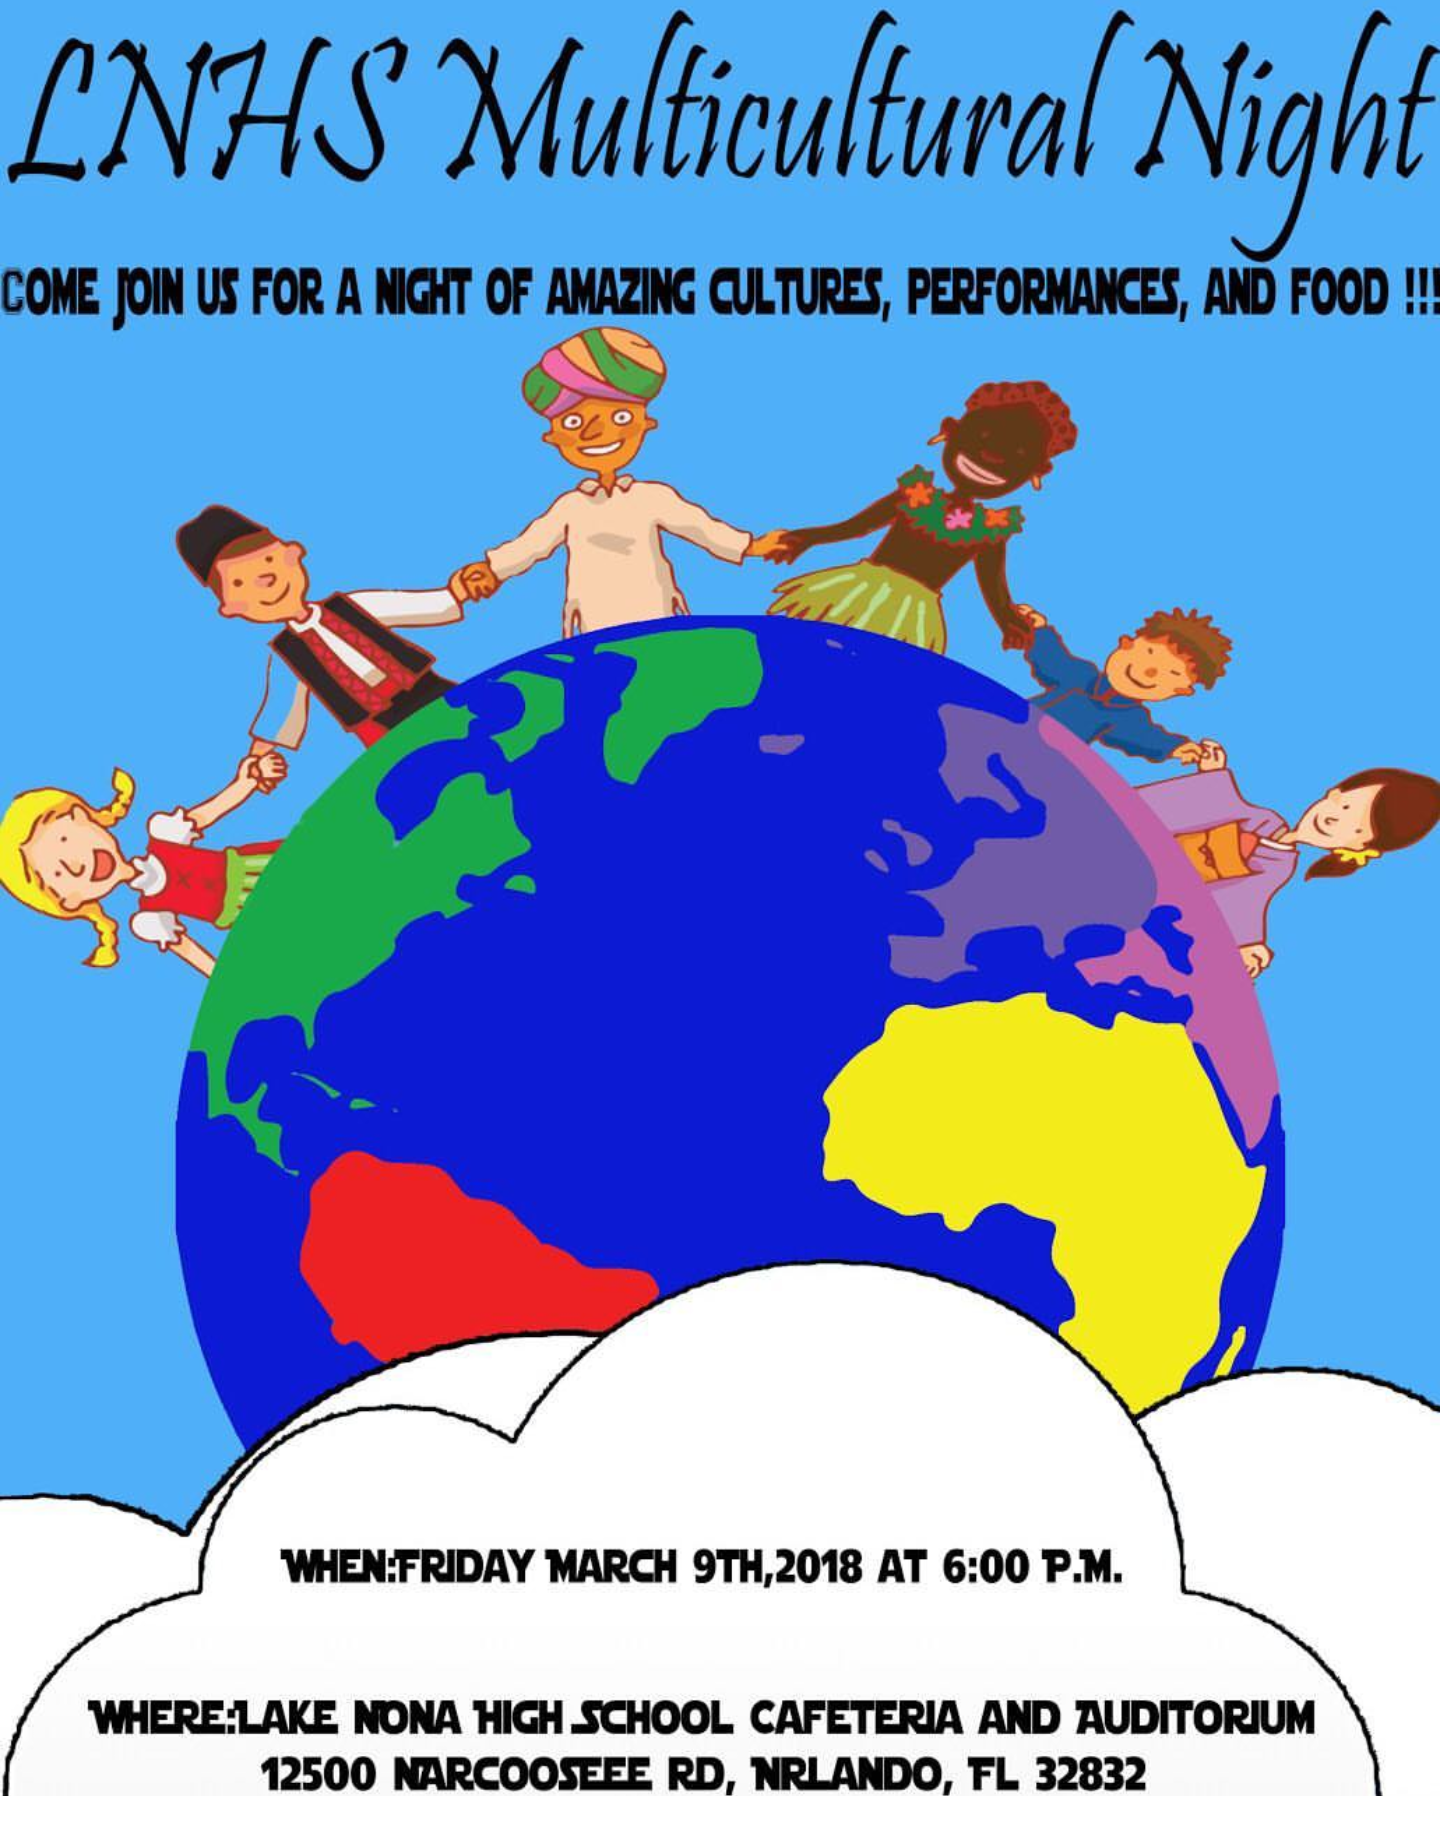 LNHS Multicultural Night